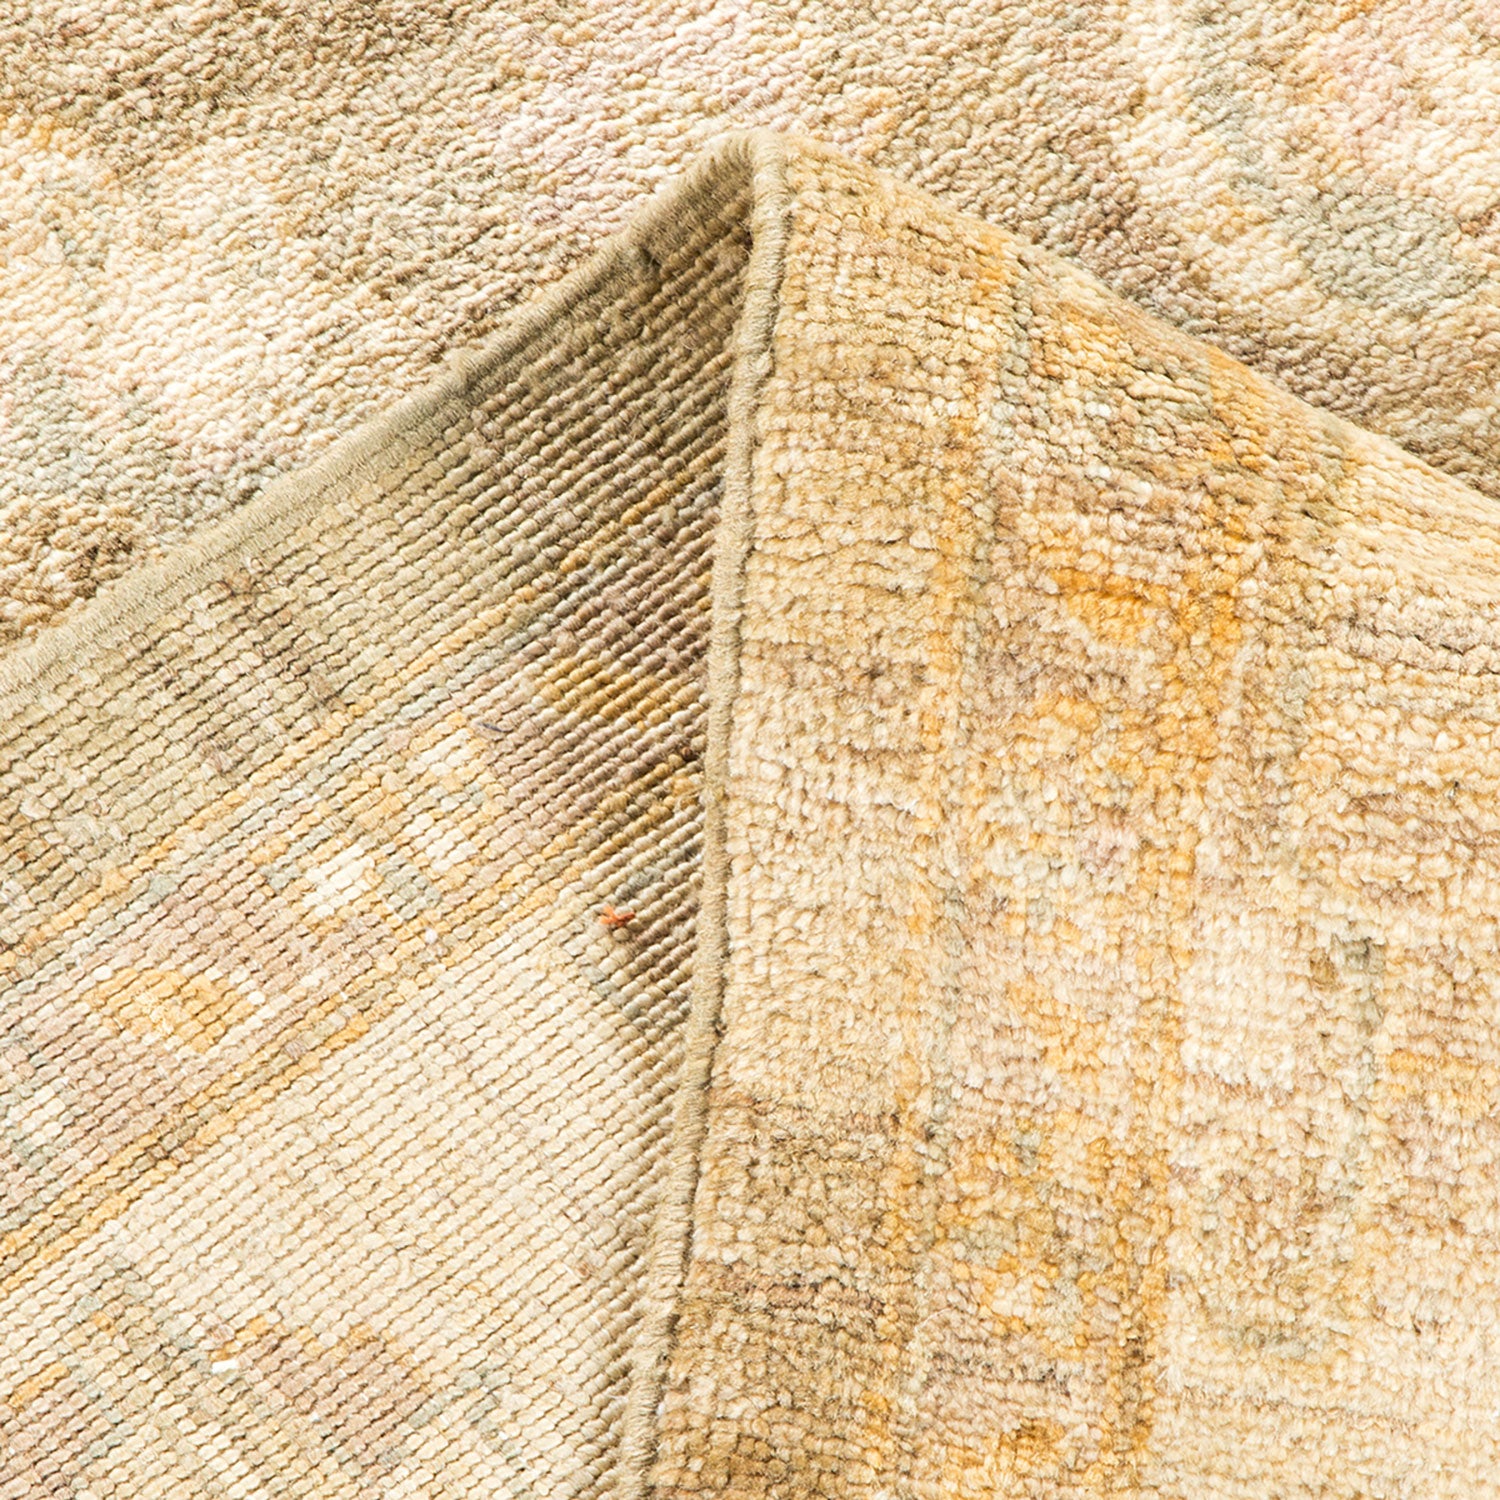 Close-up view of folded, plush fabric in neutral tones.